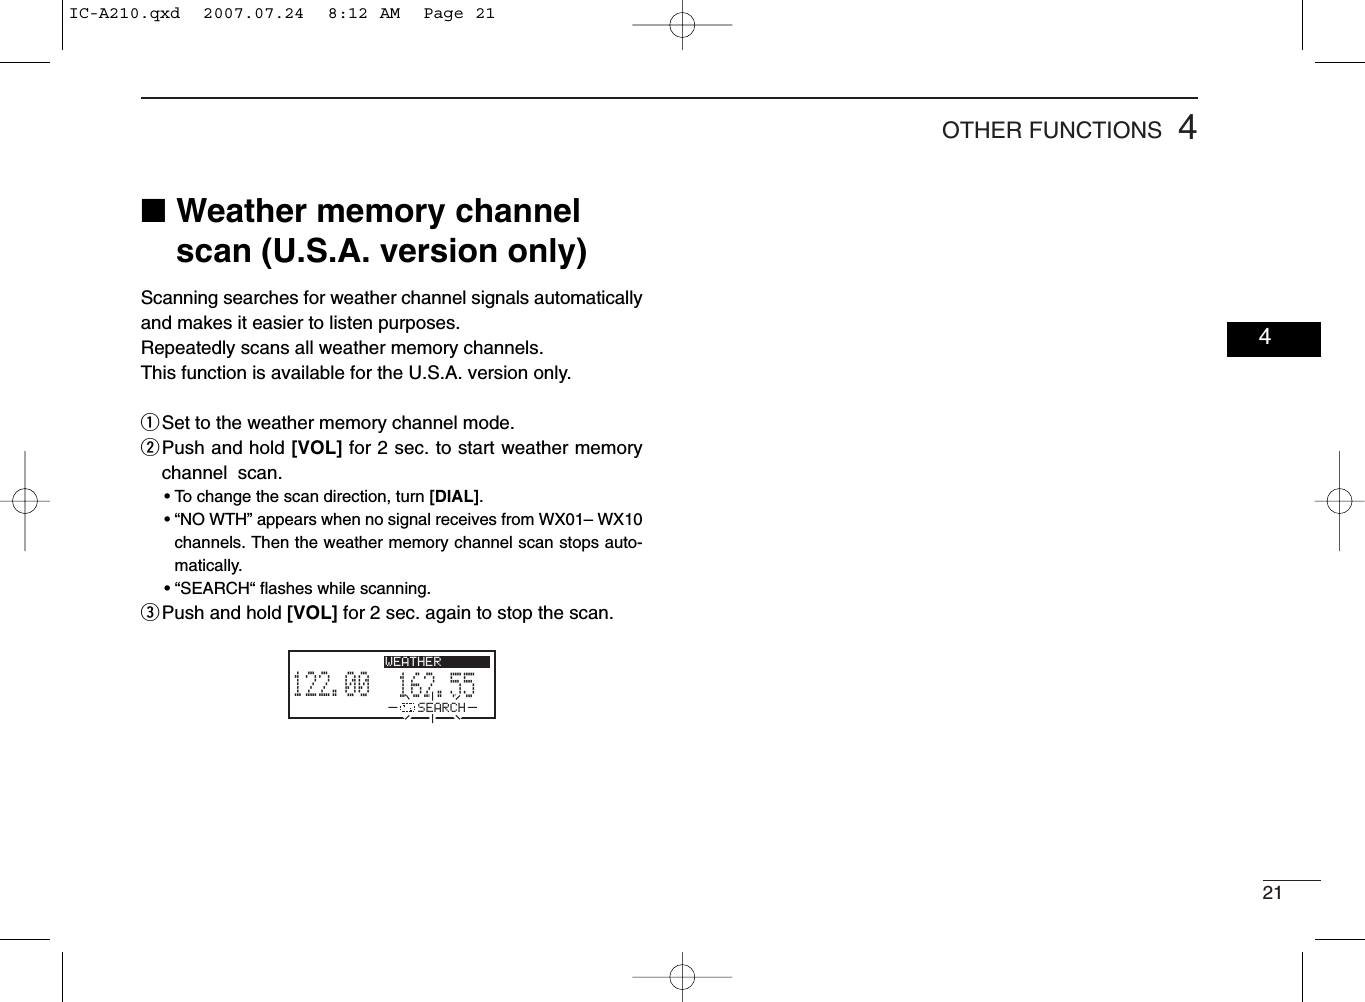 214OTHER FUNCTIONS■Weather memory channelscan (U.S.A. version only)Scanning searches for weather channel signals automaticallyand makes it easier to listen purposes.Repeatedly scans all weather memory channels.This function is available for the U.S.A. version only.qSet to the weather memory channel mode.wPush and hold [VOL] for 2 sec. to start weather memorychannel  scan.• To change the scan direction, turn [DIAL].• “NO WTH” appears when no signal receives from WX01– WX10channels. Then the weather memory channel scan stops auto-matically.• “SEARCH“ ﬂashes while scanning.ePush and hold [VOL] for 2 sec. again to stop the scan.162.555122.00RX WEATHERSEARCH04IC-A210.qxd  2007.07.24  8:12 AM  Page 21